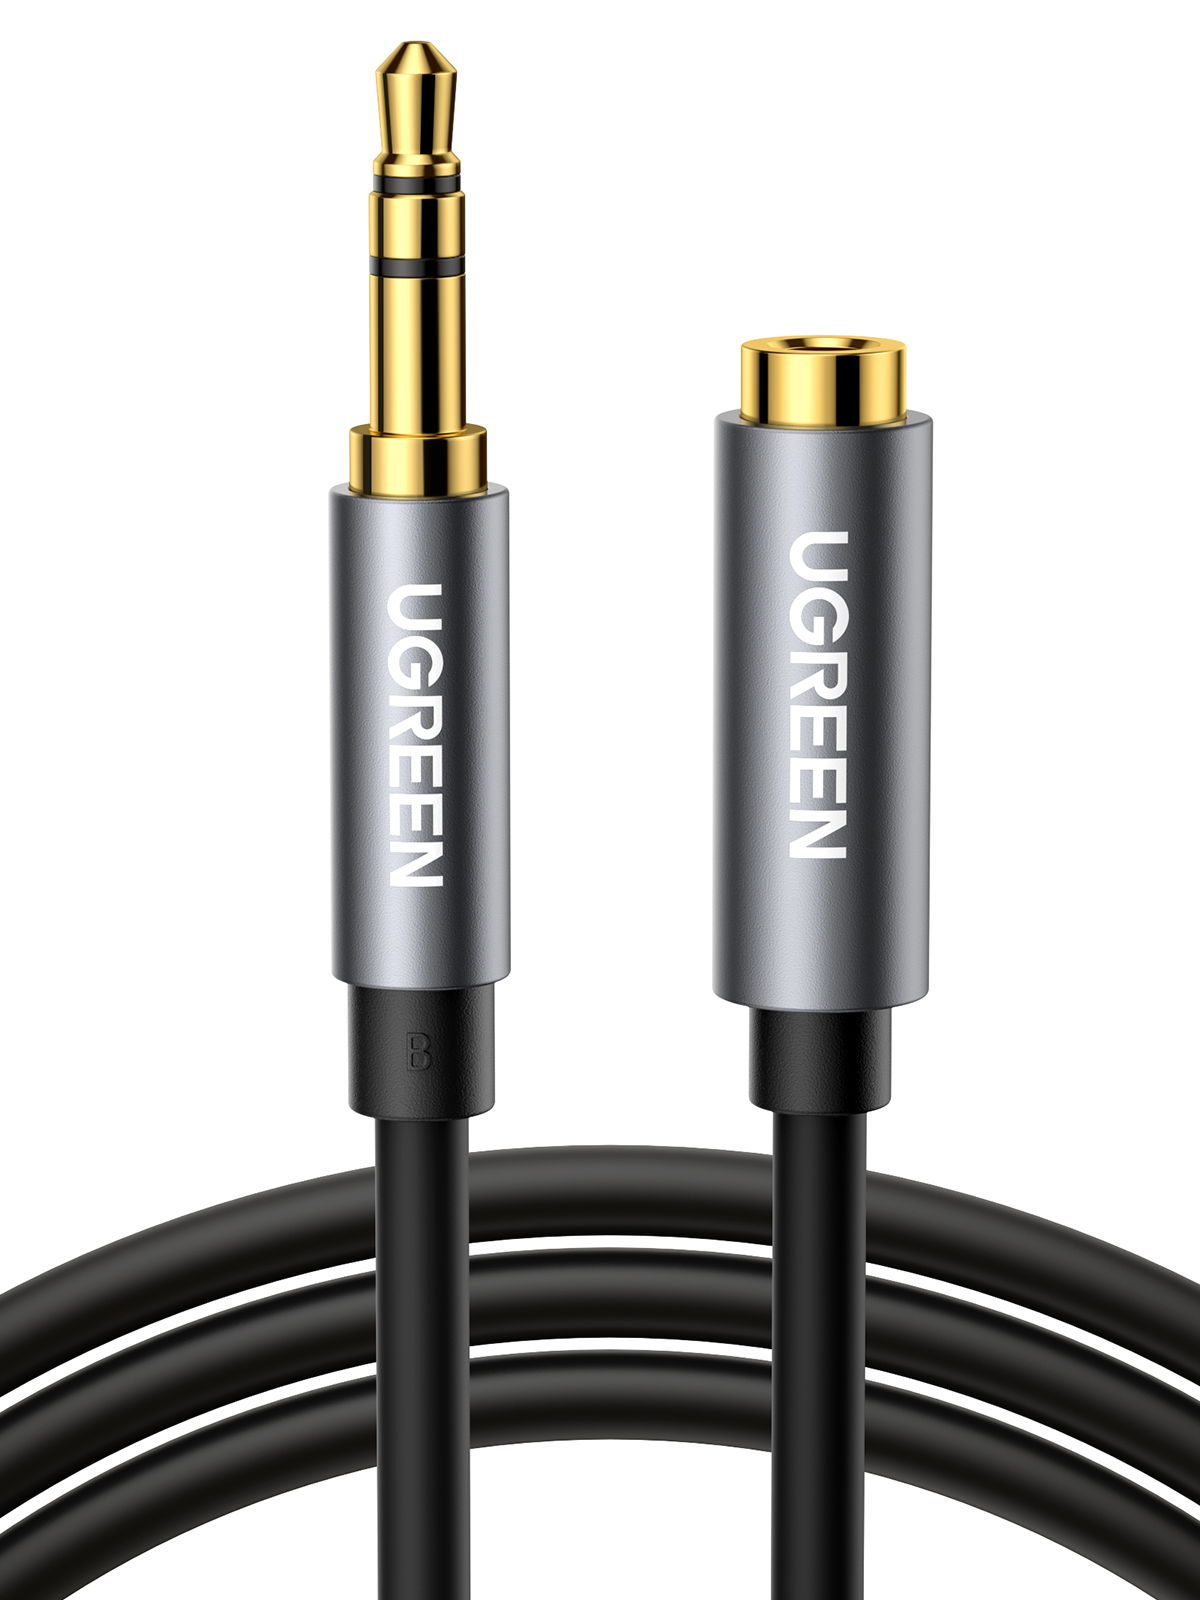 UGREEN 3.5mm Male to 3.5mm Female Extension Cable 1m (Black)